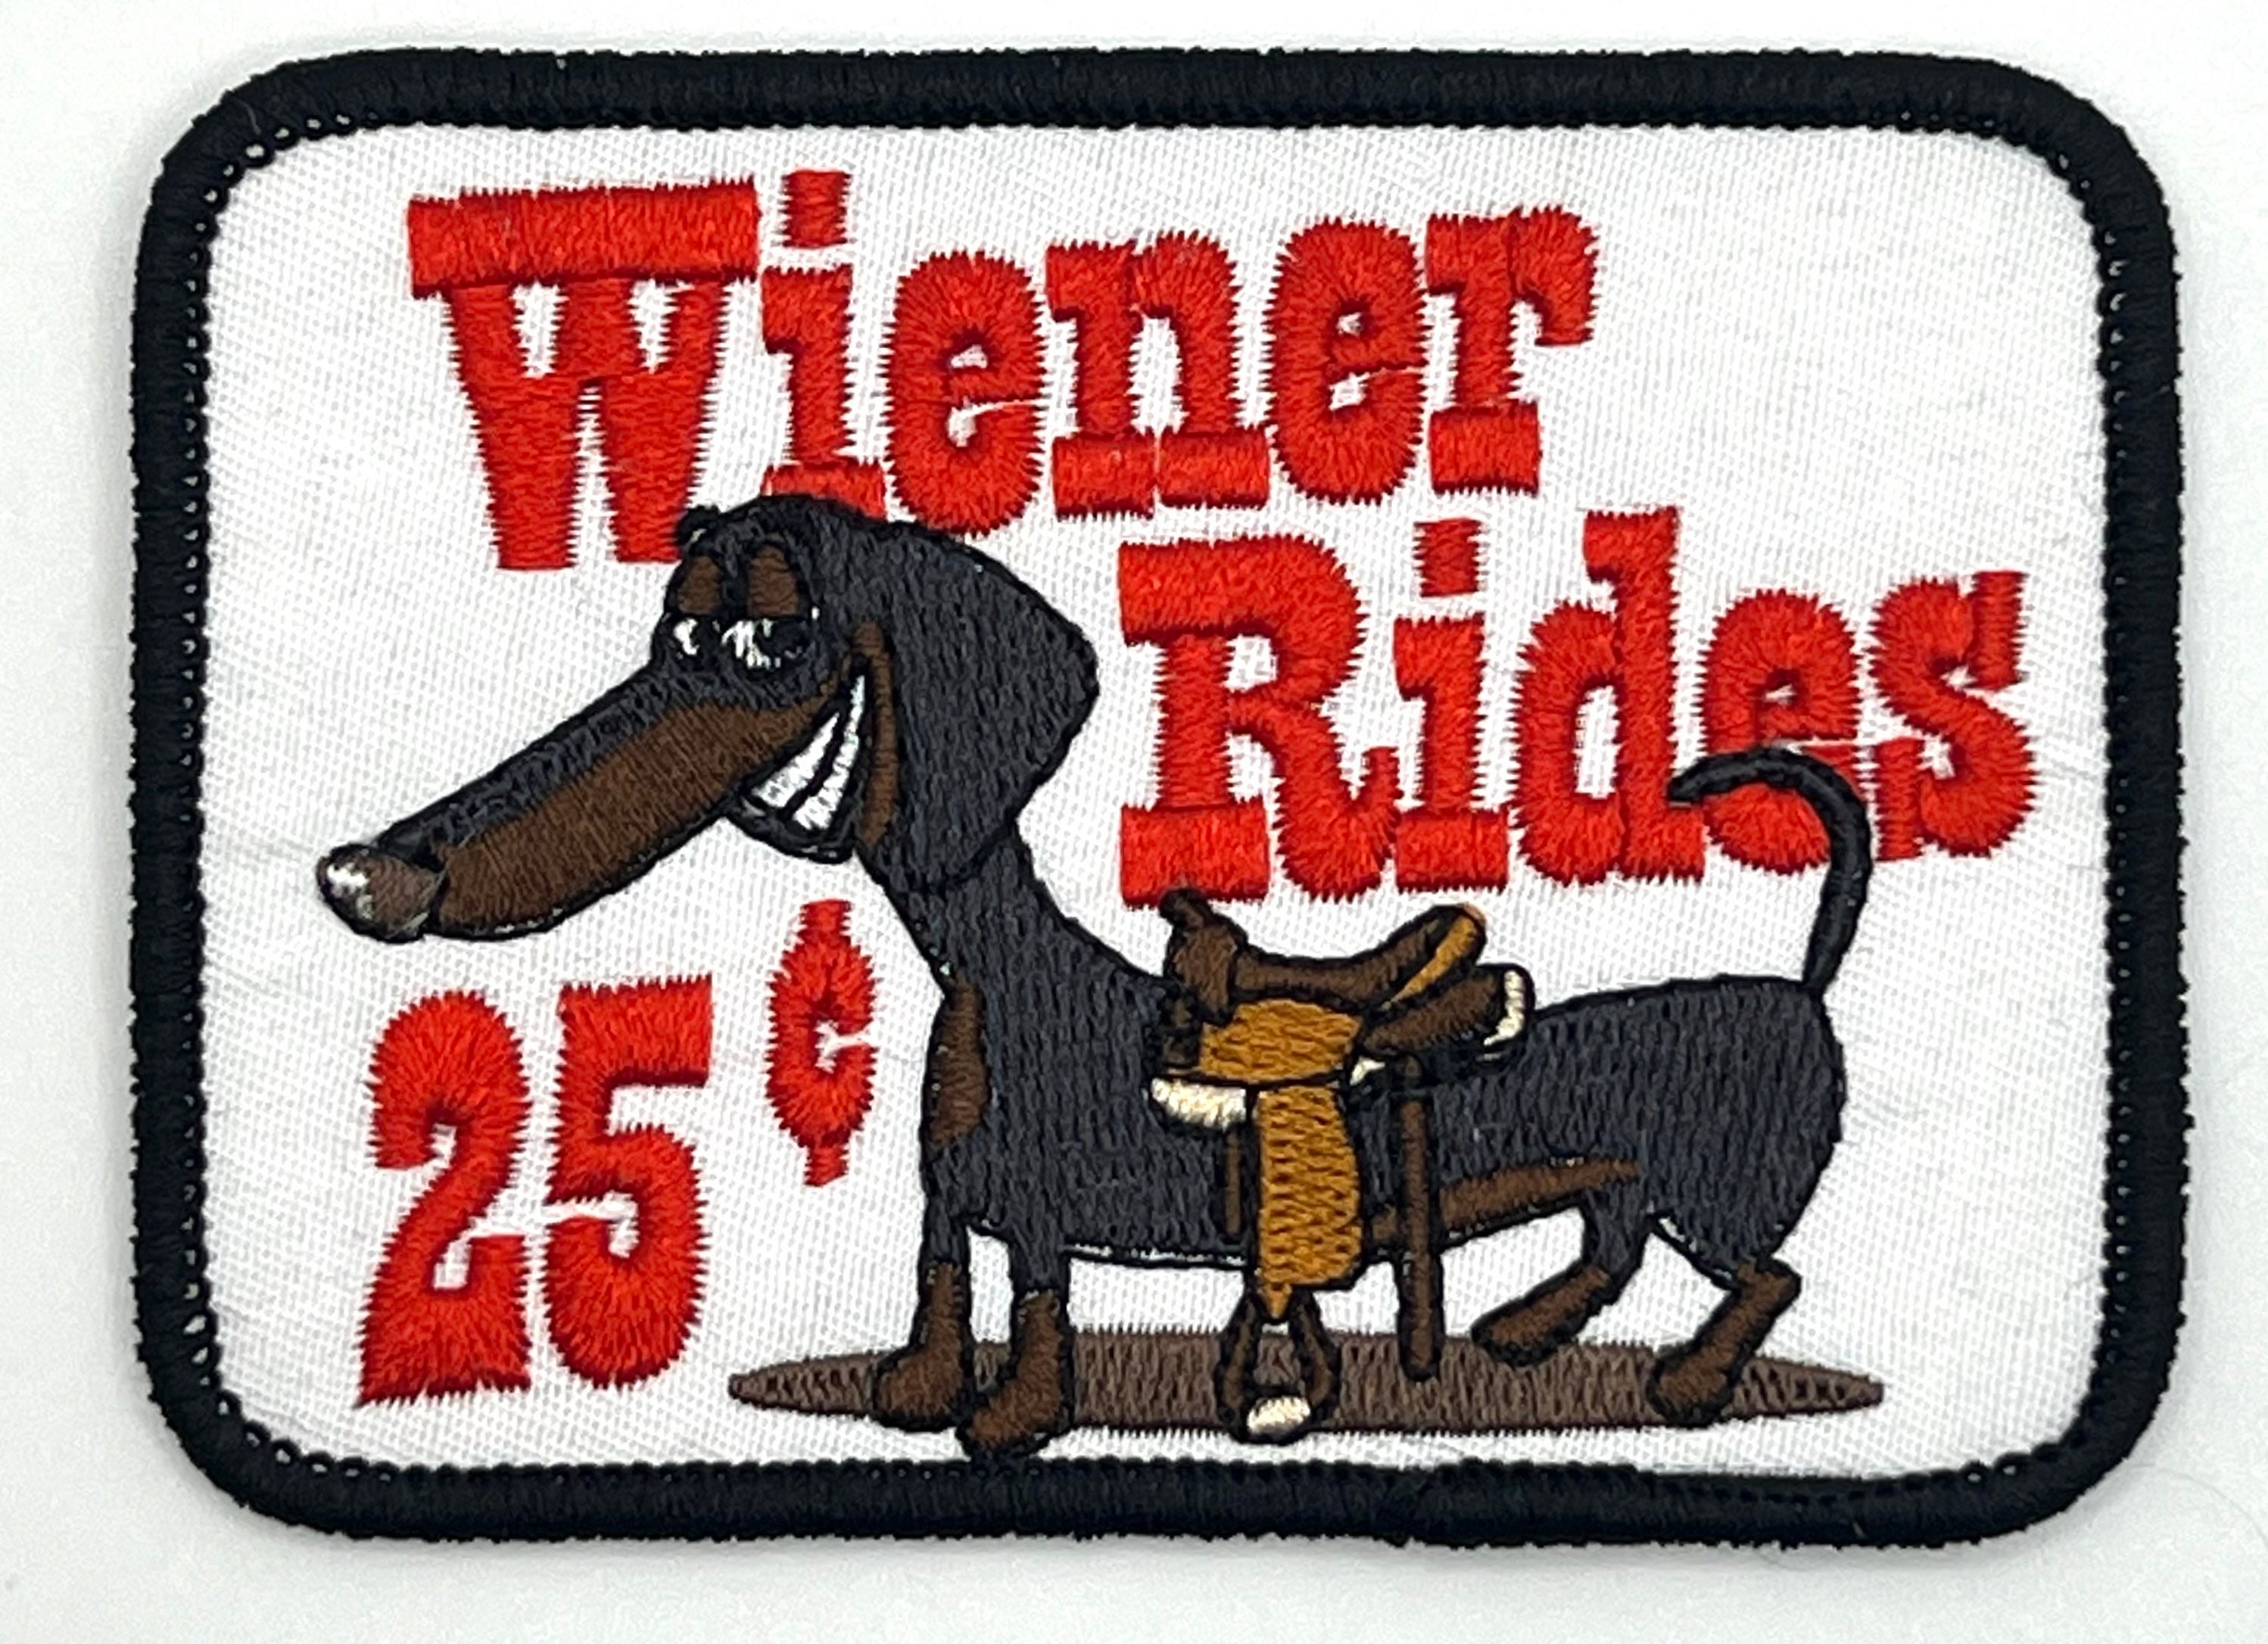 Wiener Rides 25 Cents Humorous Dog Funny Vintage Style Patch image